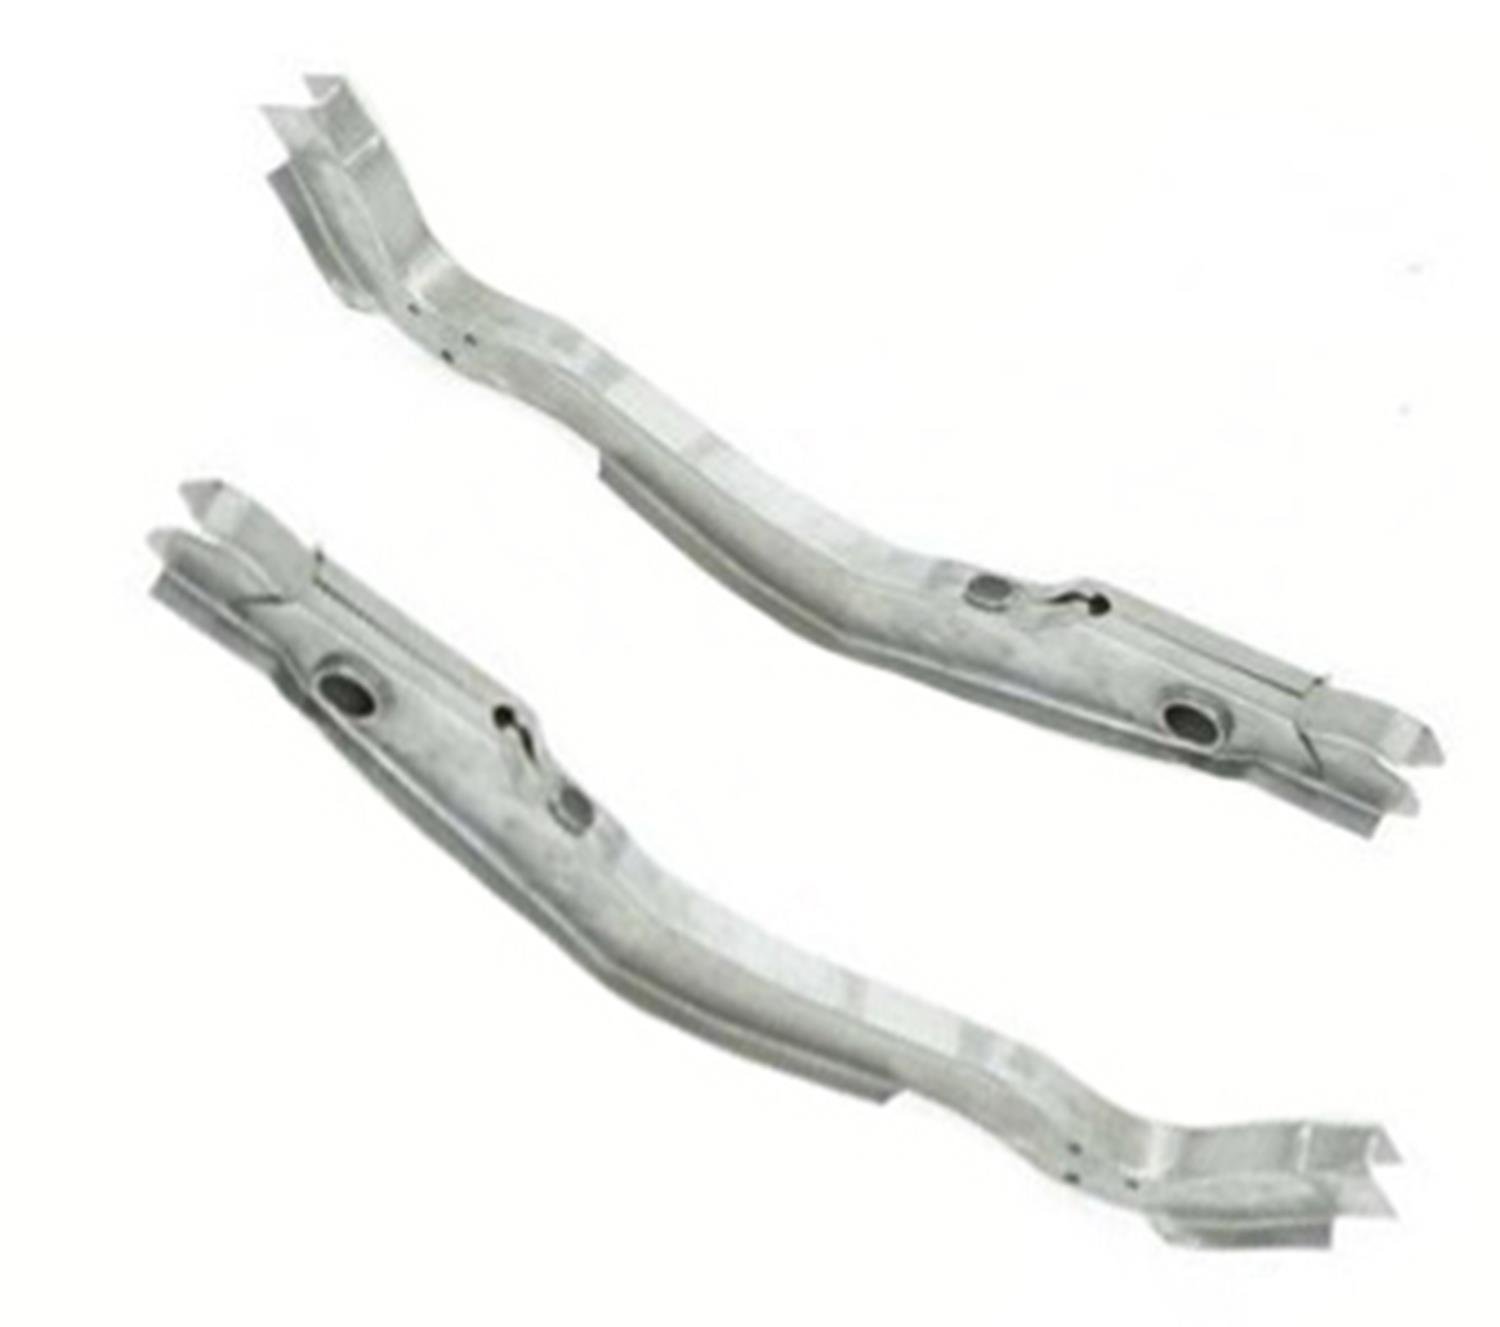 Rear Partial Frame Rail Kit for 1970-1973 Chevrolet Camaro & Pontiac Firebird without High Performance Package